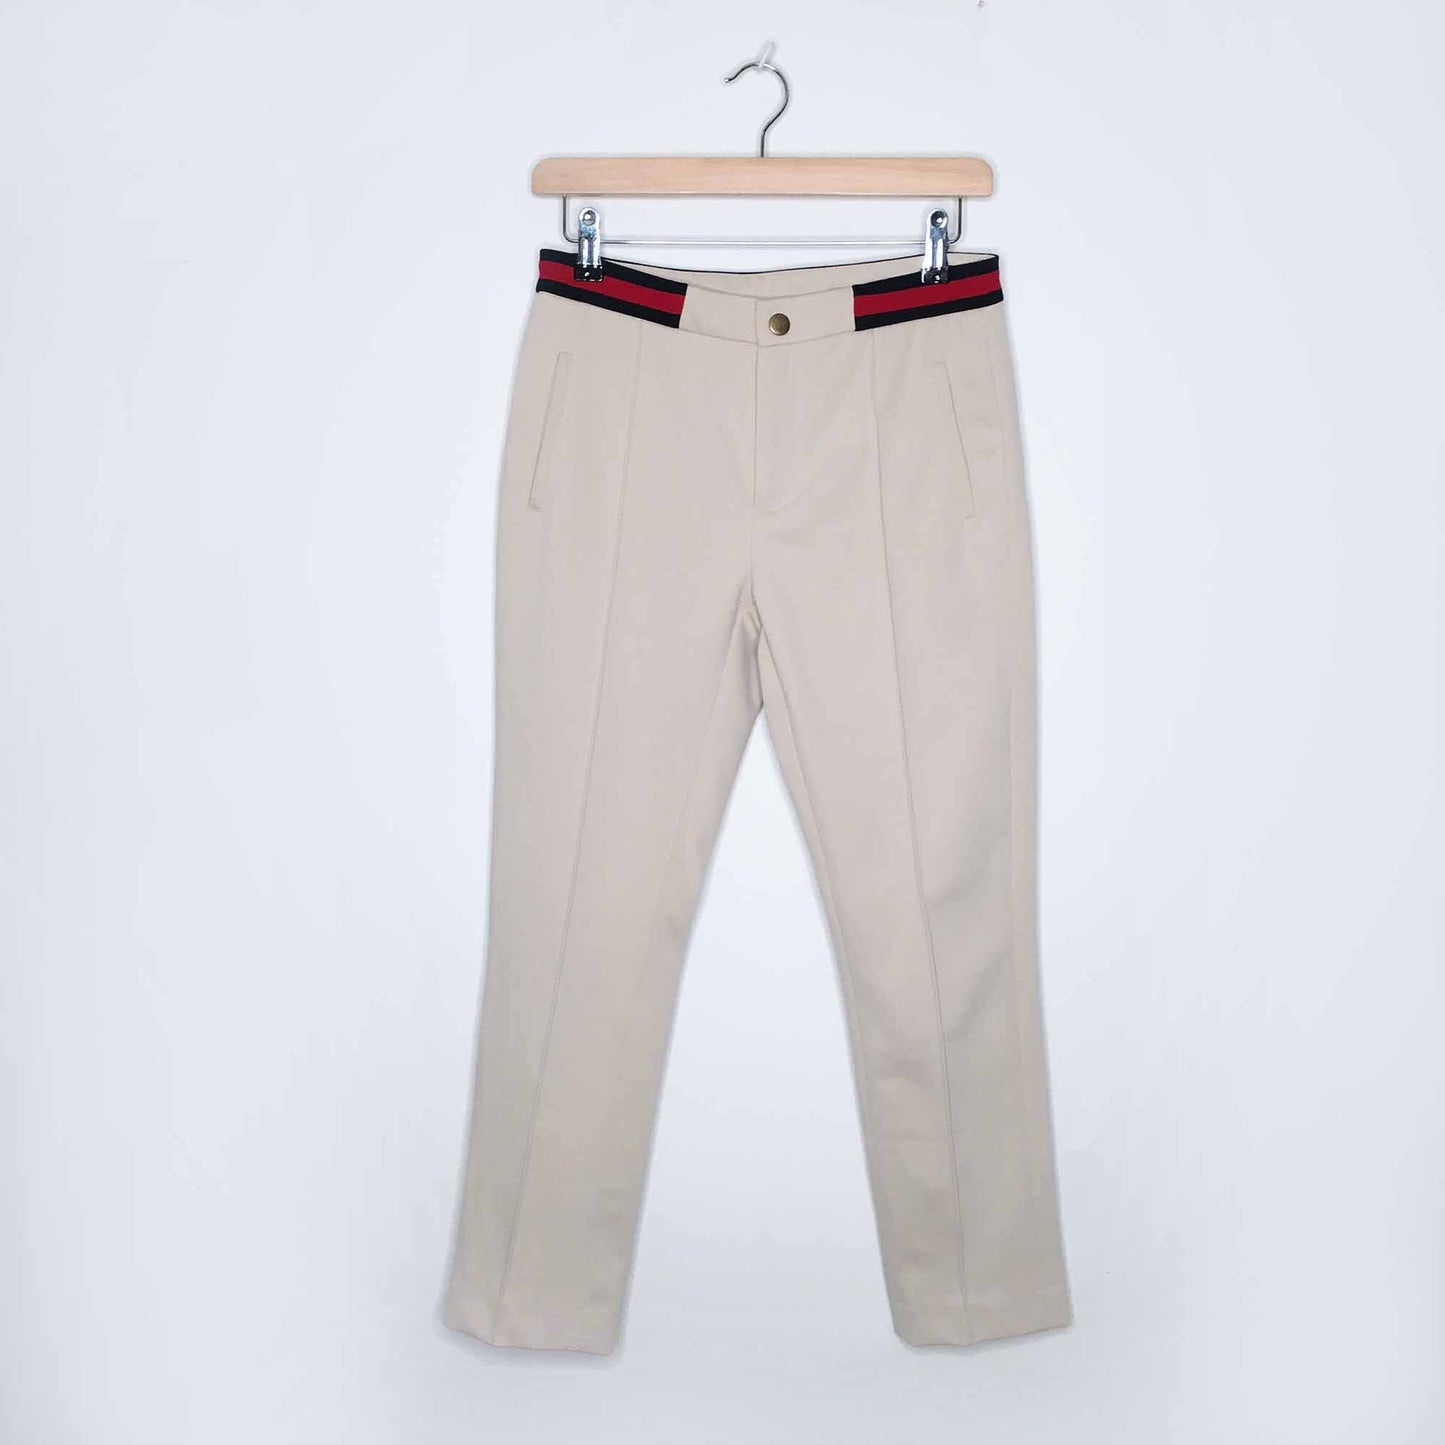 Gucci high rise crop trouser with striped waistband - size 38